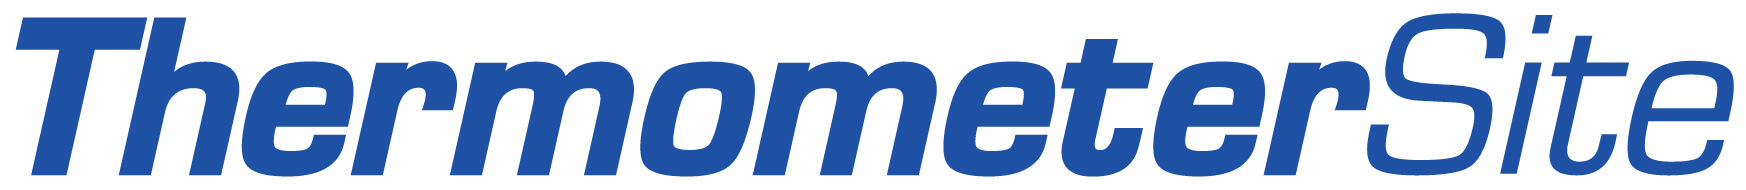 Thermometer Site logo